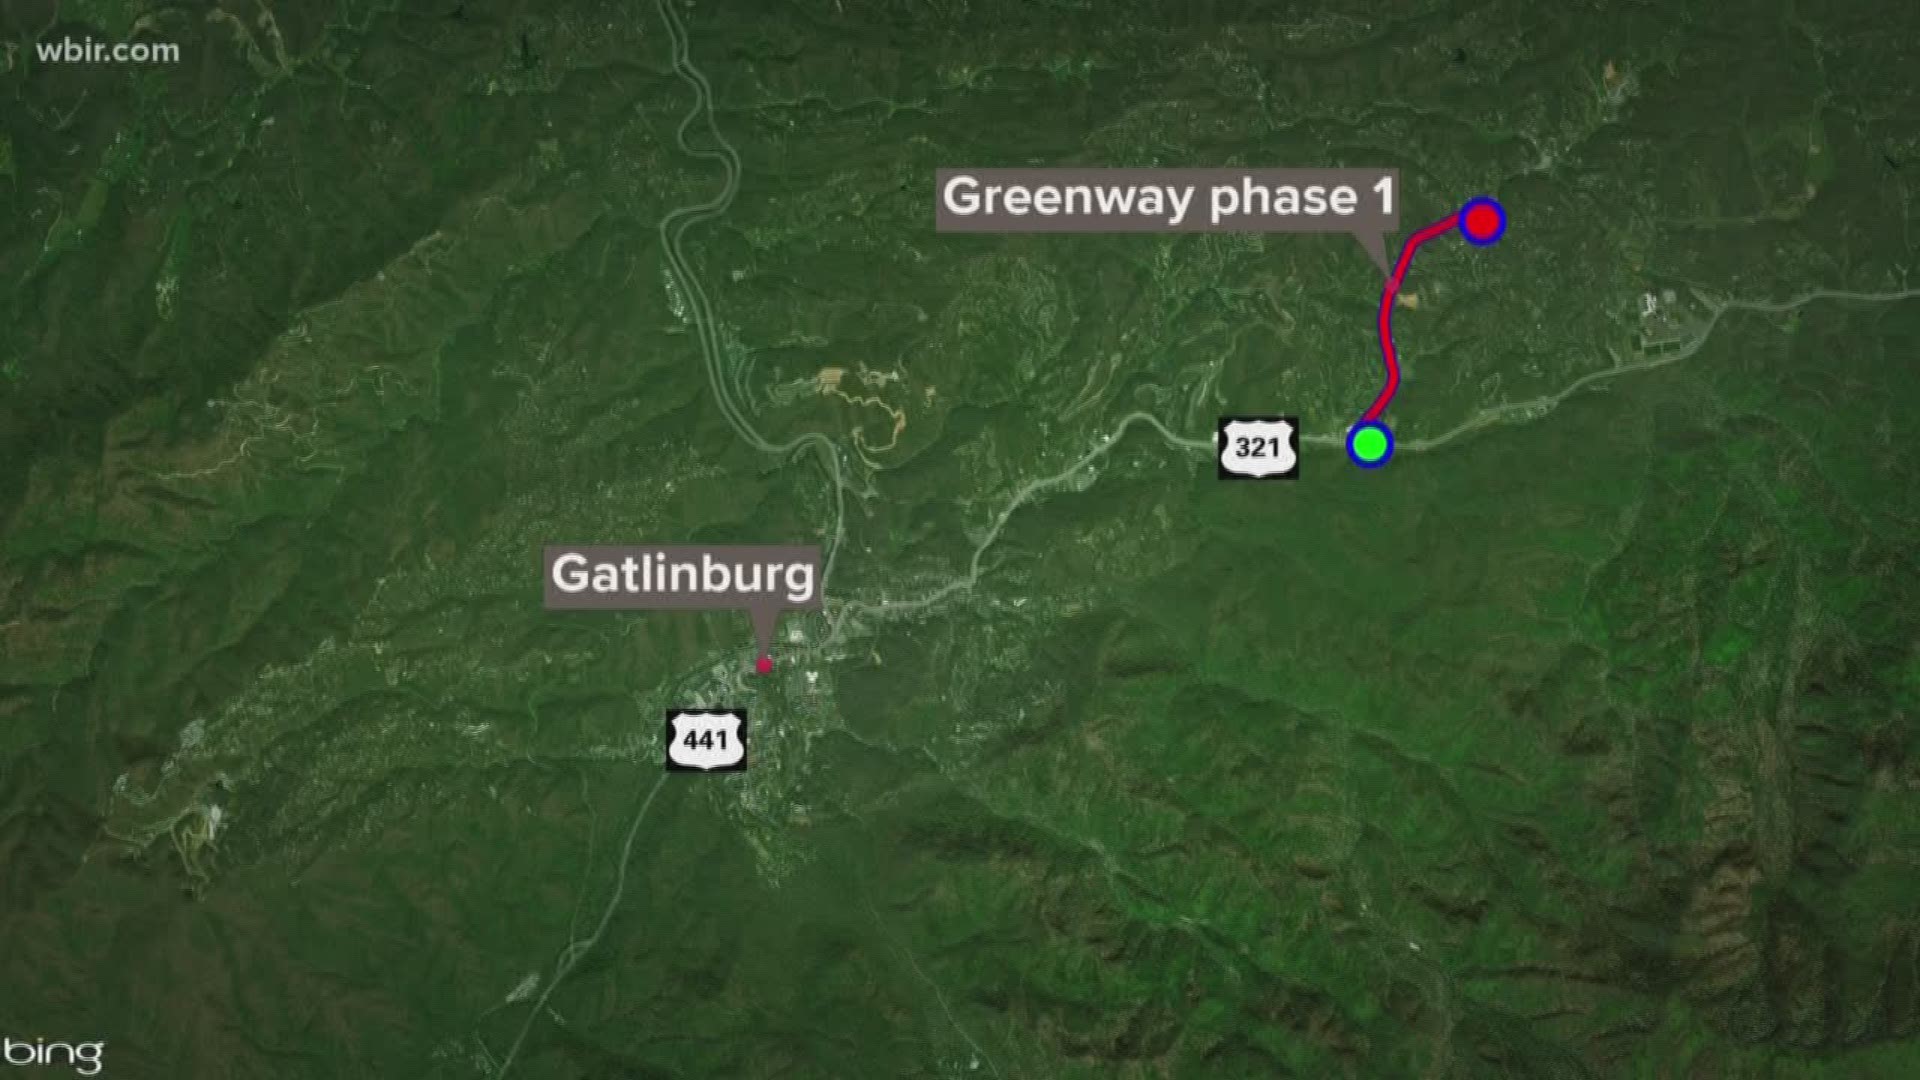 A group of UT engineering students is working to make a new greenway in Gatlinburg come to life.